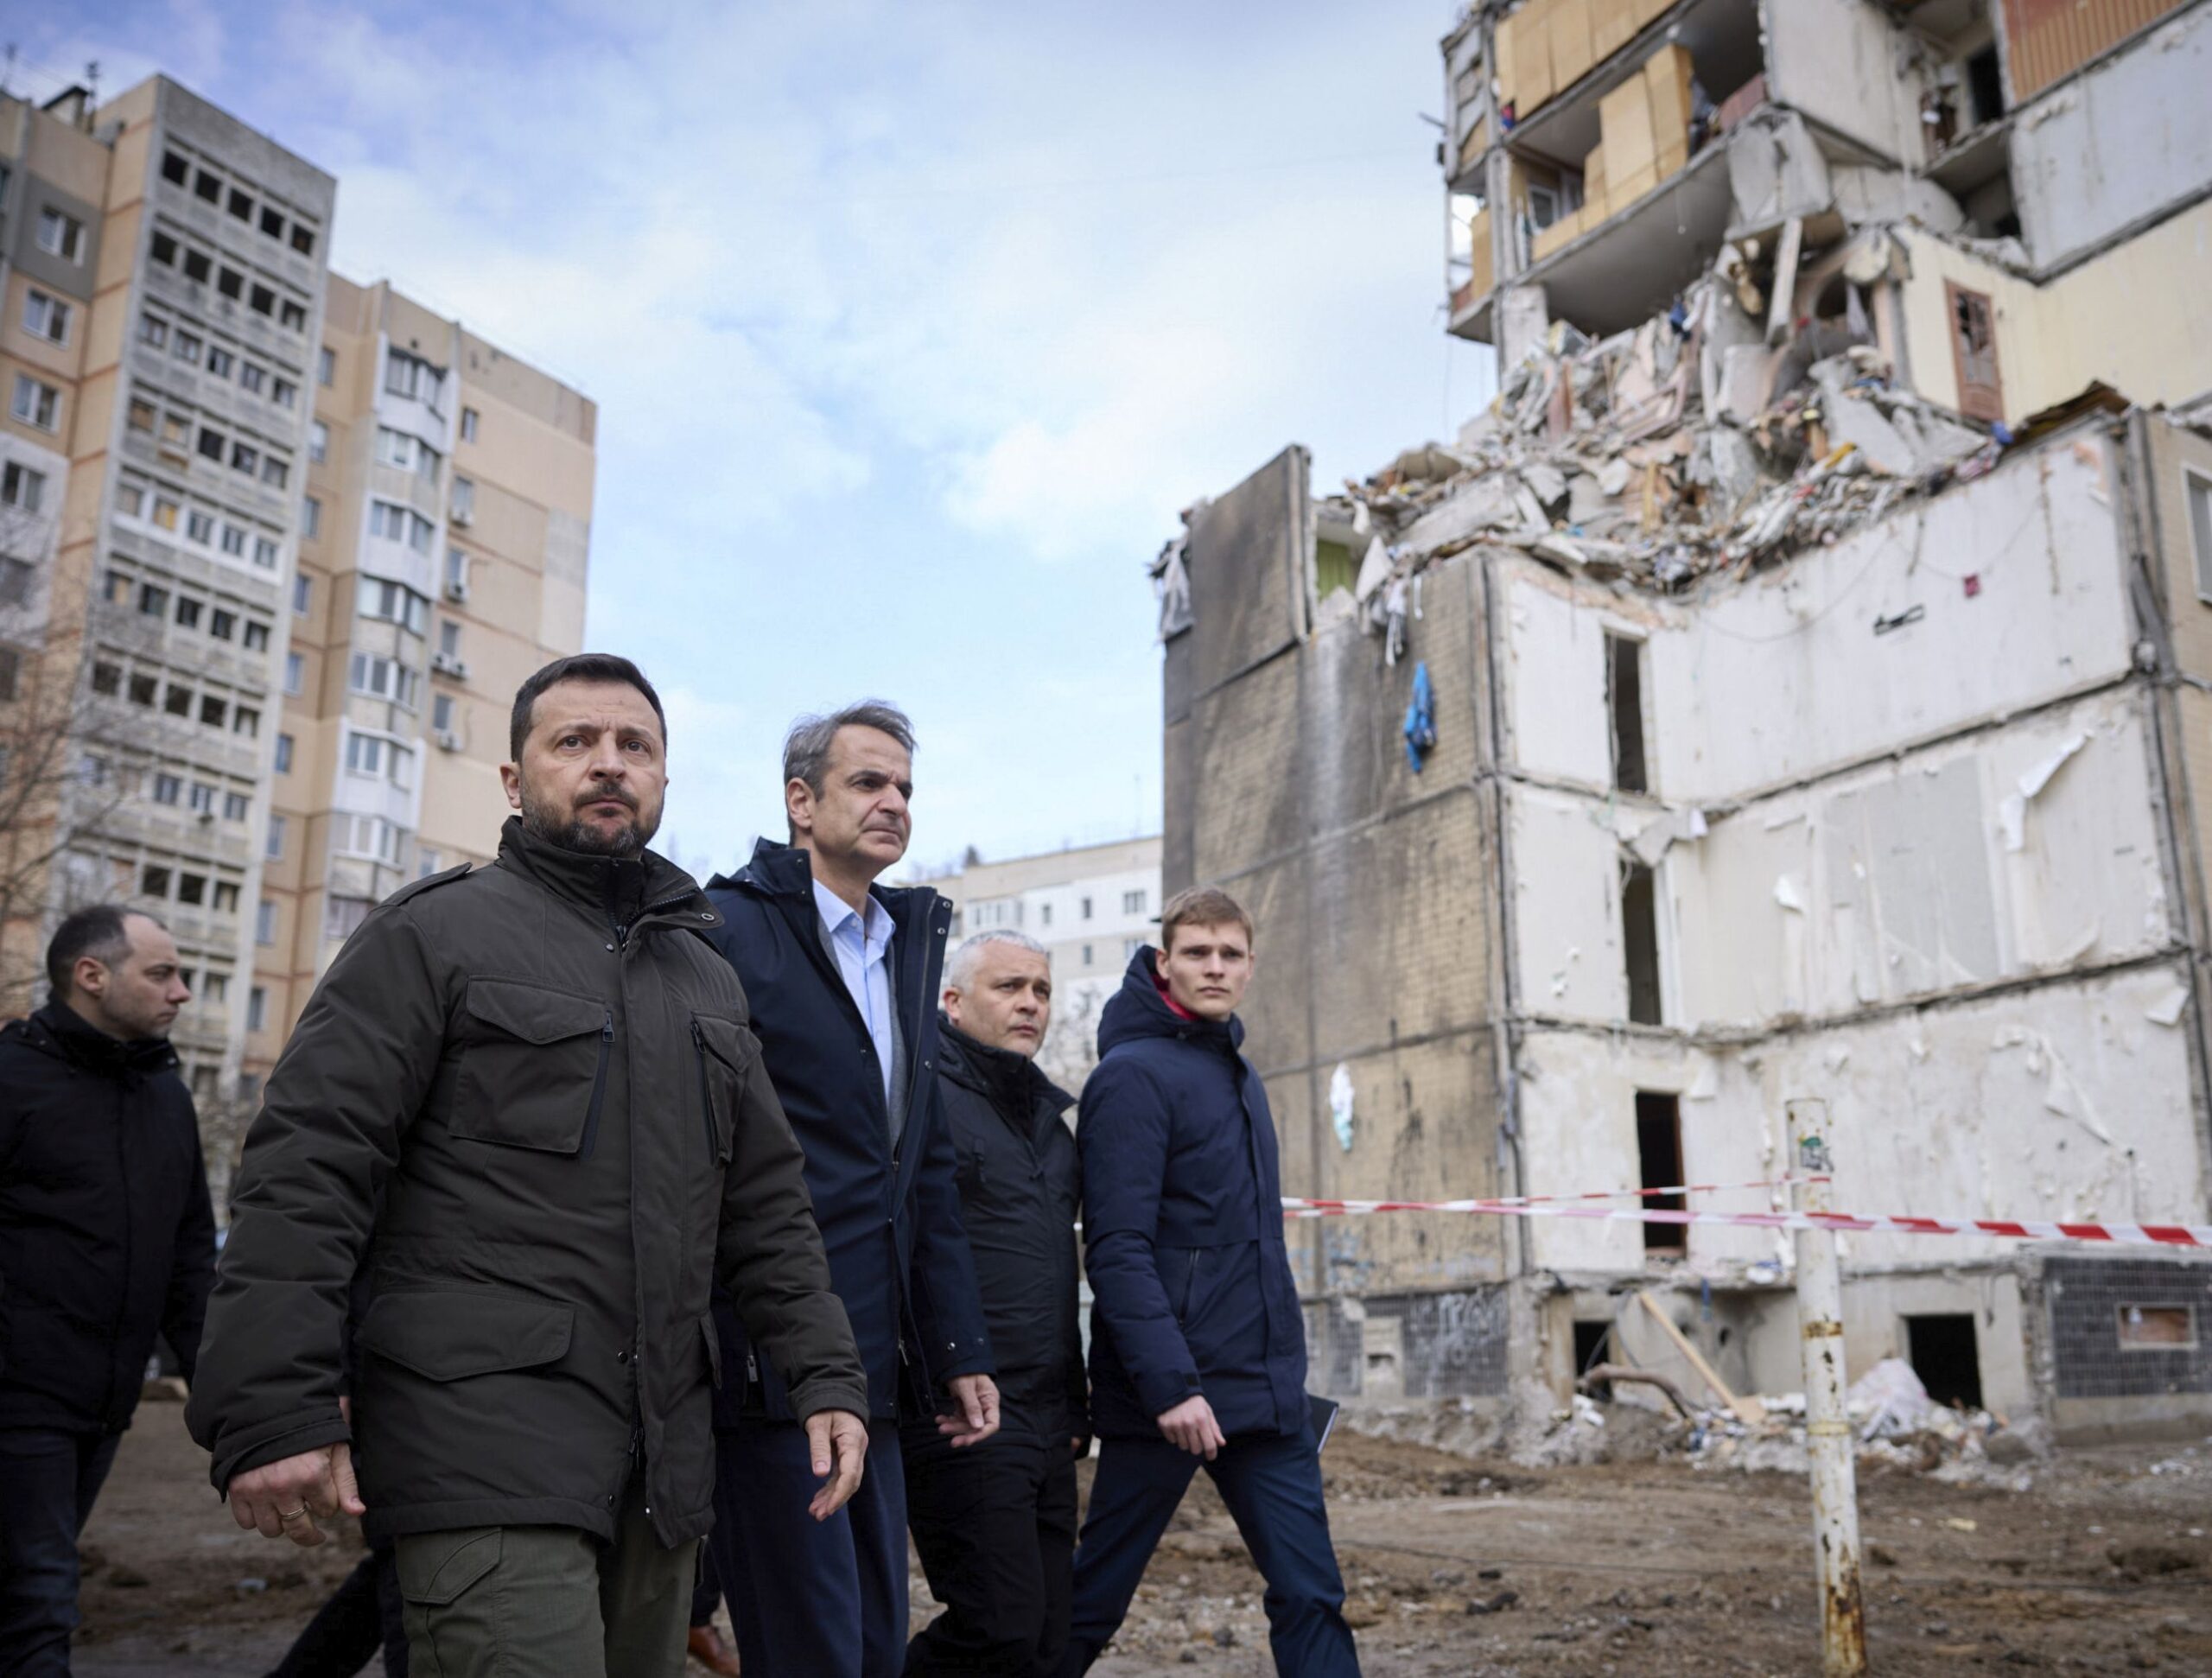 epa11202343 A handout photo made available by the presidential press service shows Ukrainian President Volodymyr Zelensky (L) and Greek Prime Minister Kyriakos Mitsotakis (2-L) walking in front of a damaged residential building at a site hit in a Russian drone attack on 02 March 2024, in Odesa, Ukraine, 06 March 2024. Twelve people died, including five children, and eight others were injured in the drone attack. The Greek prime minister arrived in Odesa to meet with top Ukrainian officials amid the Russian invasion.  EPA/PRESIDENTIAL PRESS SERVICE HANDOUT   HANDOUT EDITORIAL USE ONLY/NO SALES HANDOUT EDITORIAL USE ONLY/NO SALES